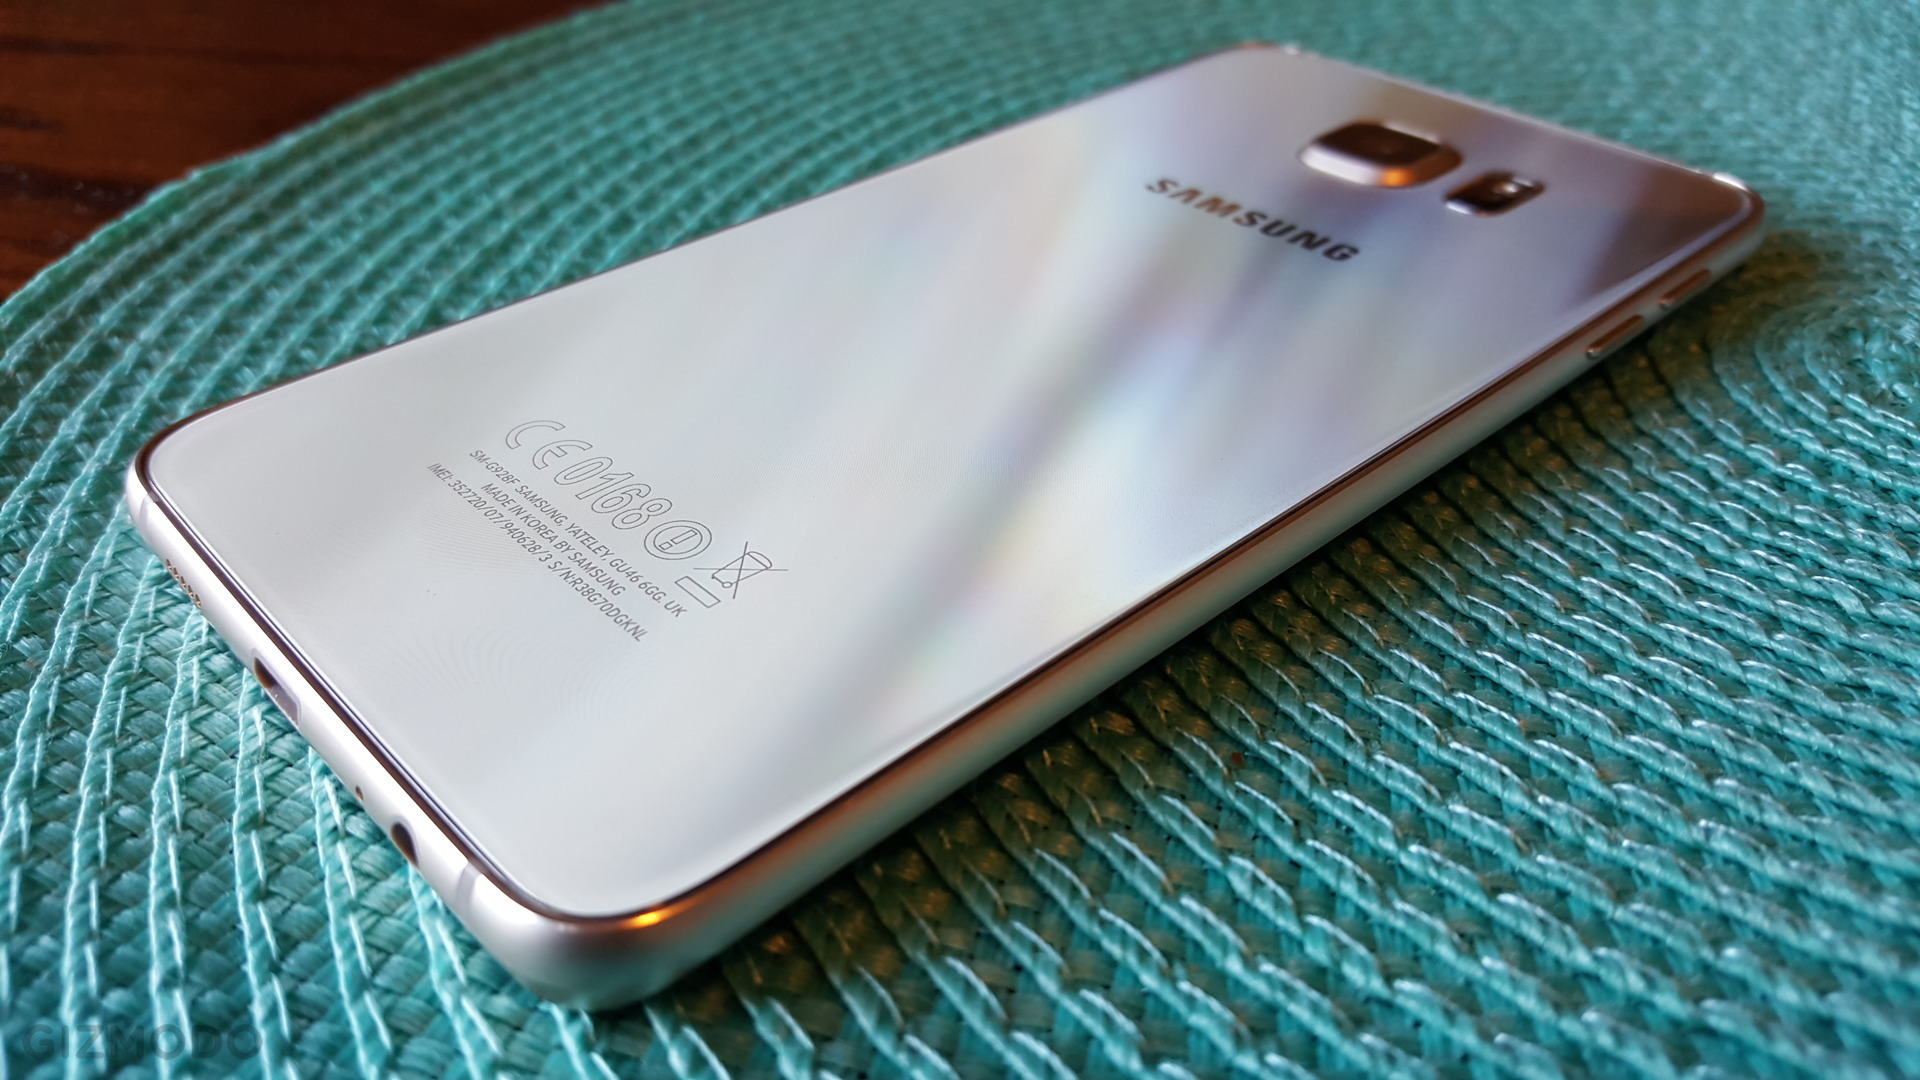 Samsung Galaxy S6 Edge+ Review: Buy It For Bragging Rights